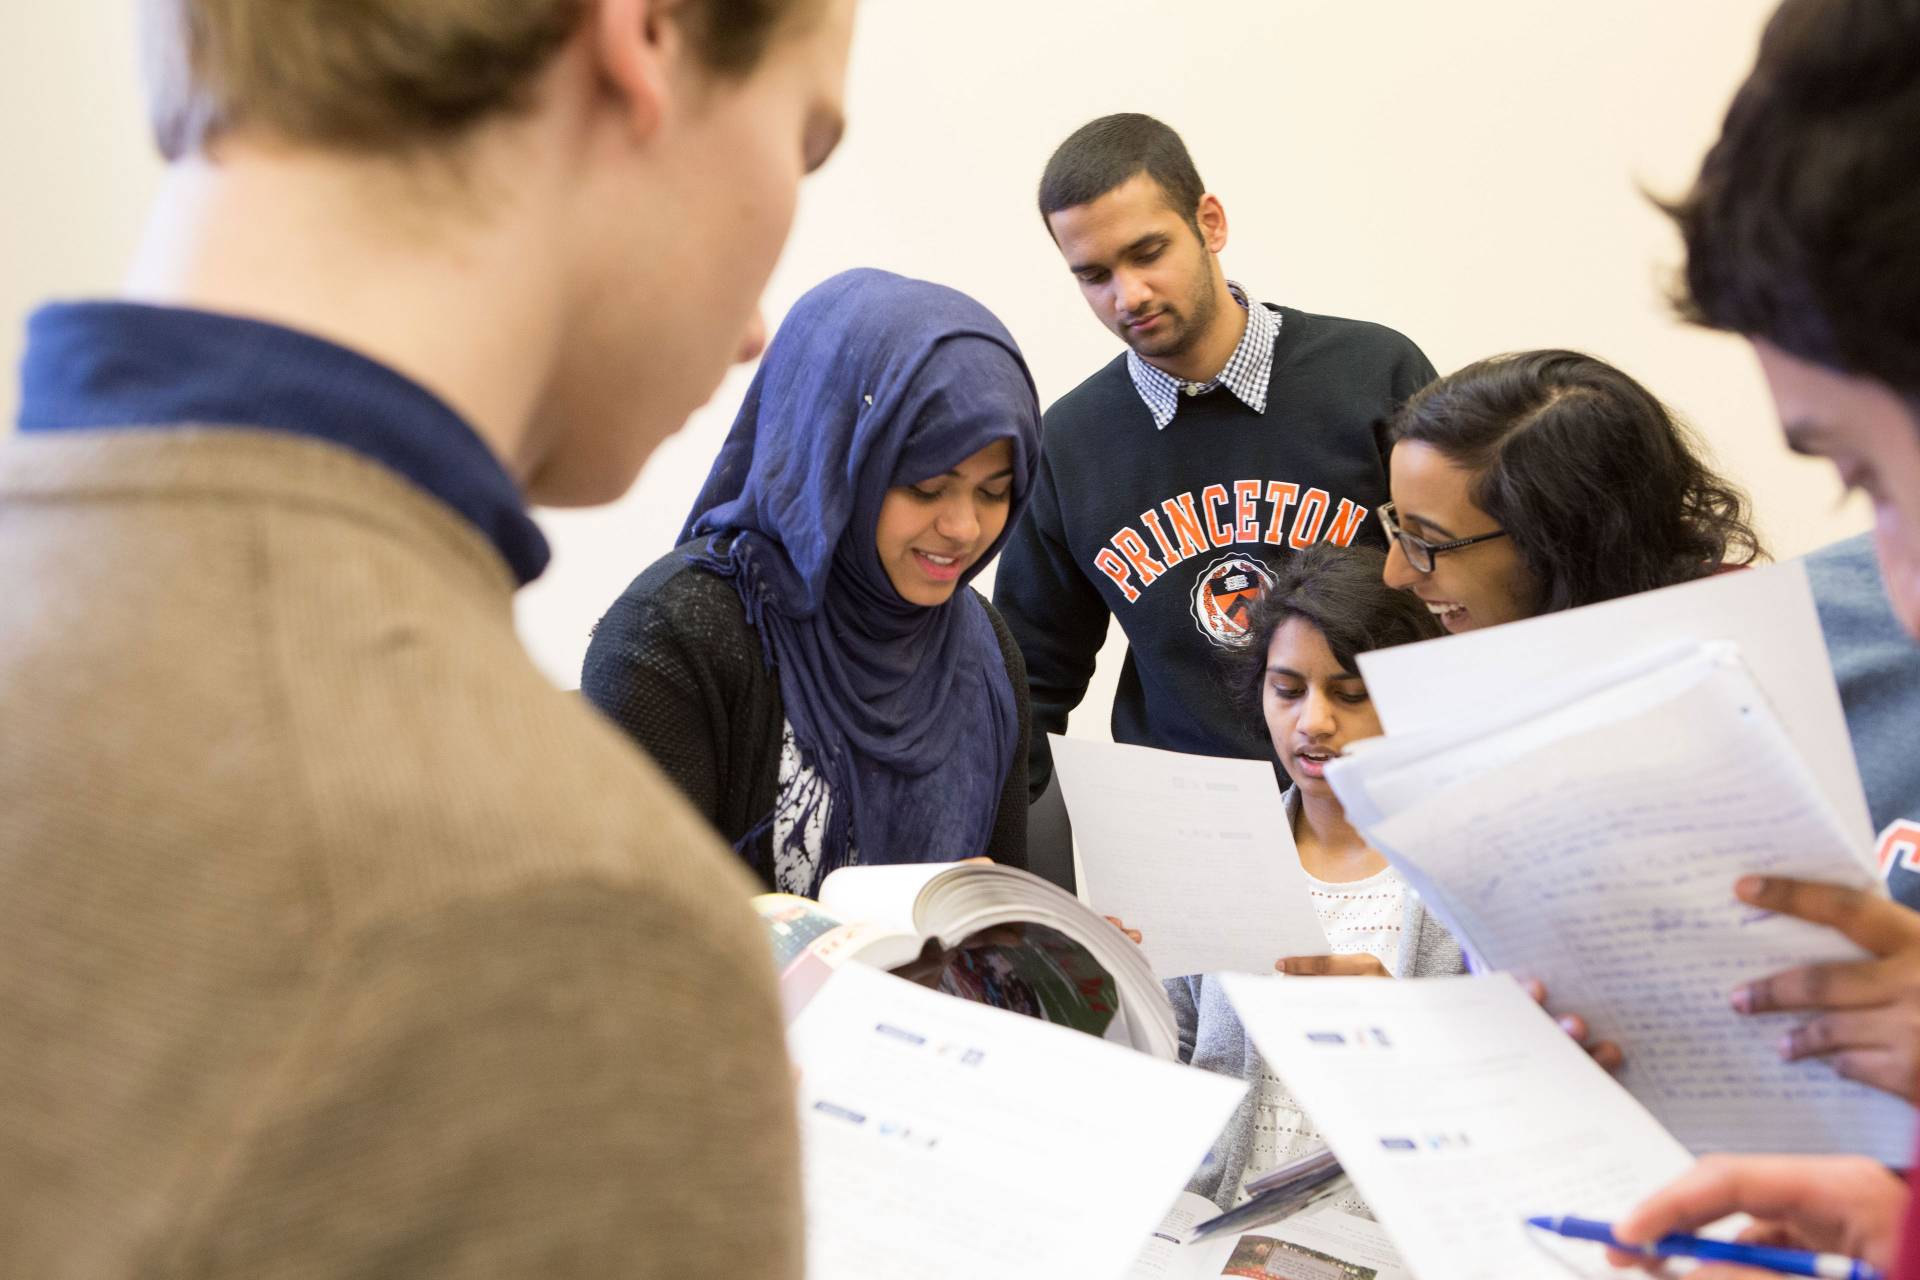 Students stand in a huddle discussing work on paper packets